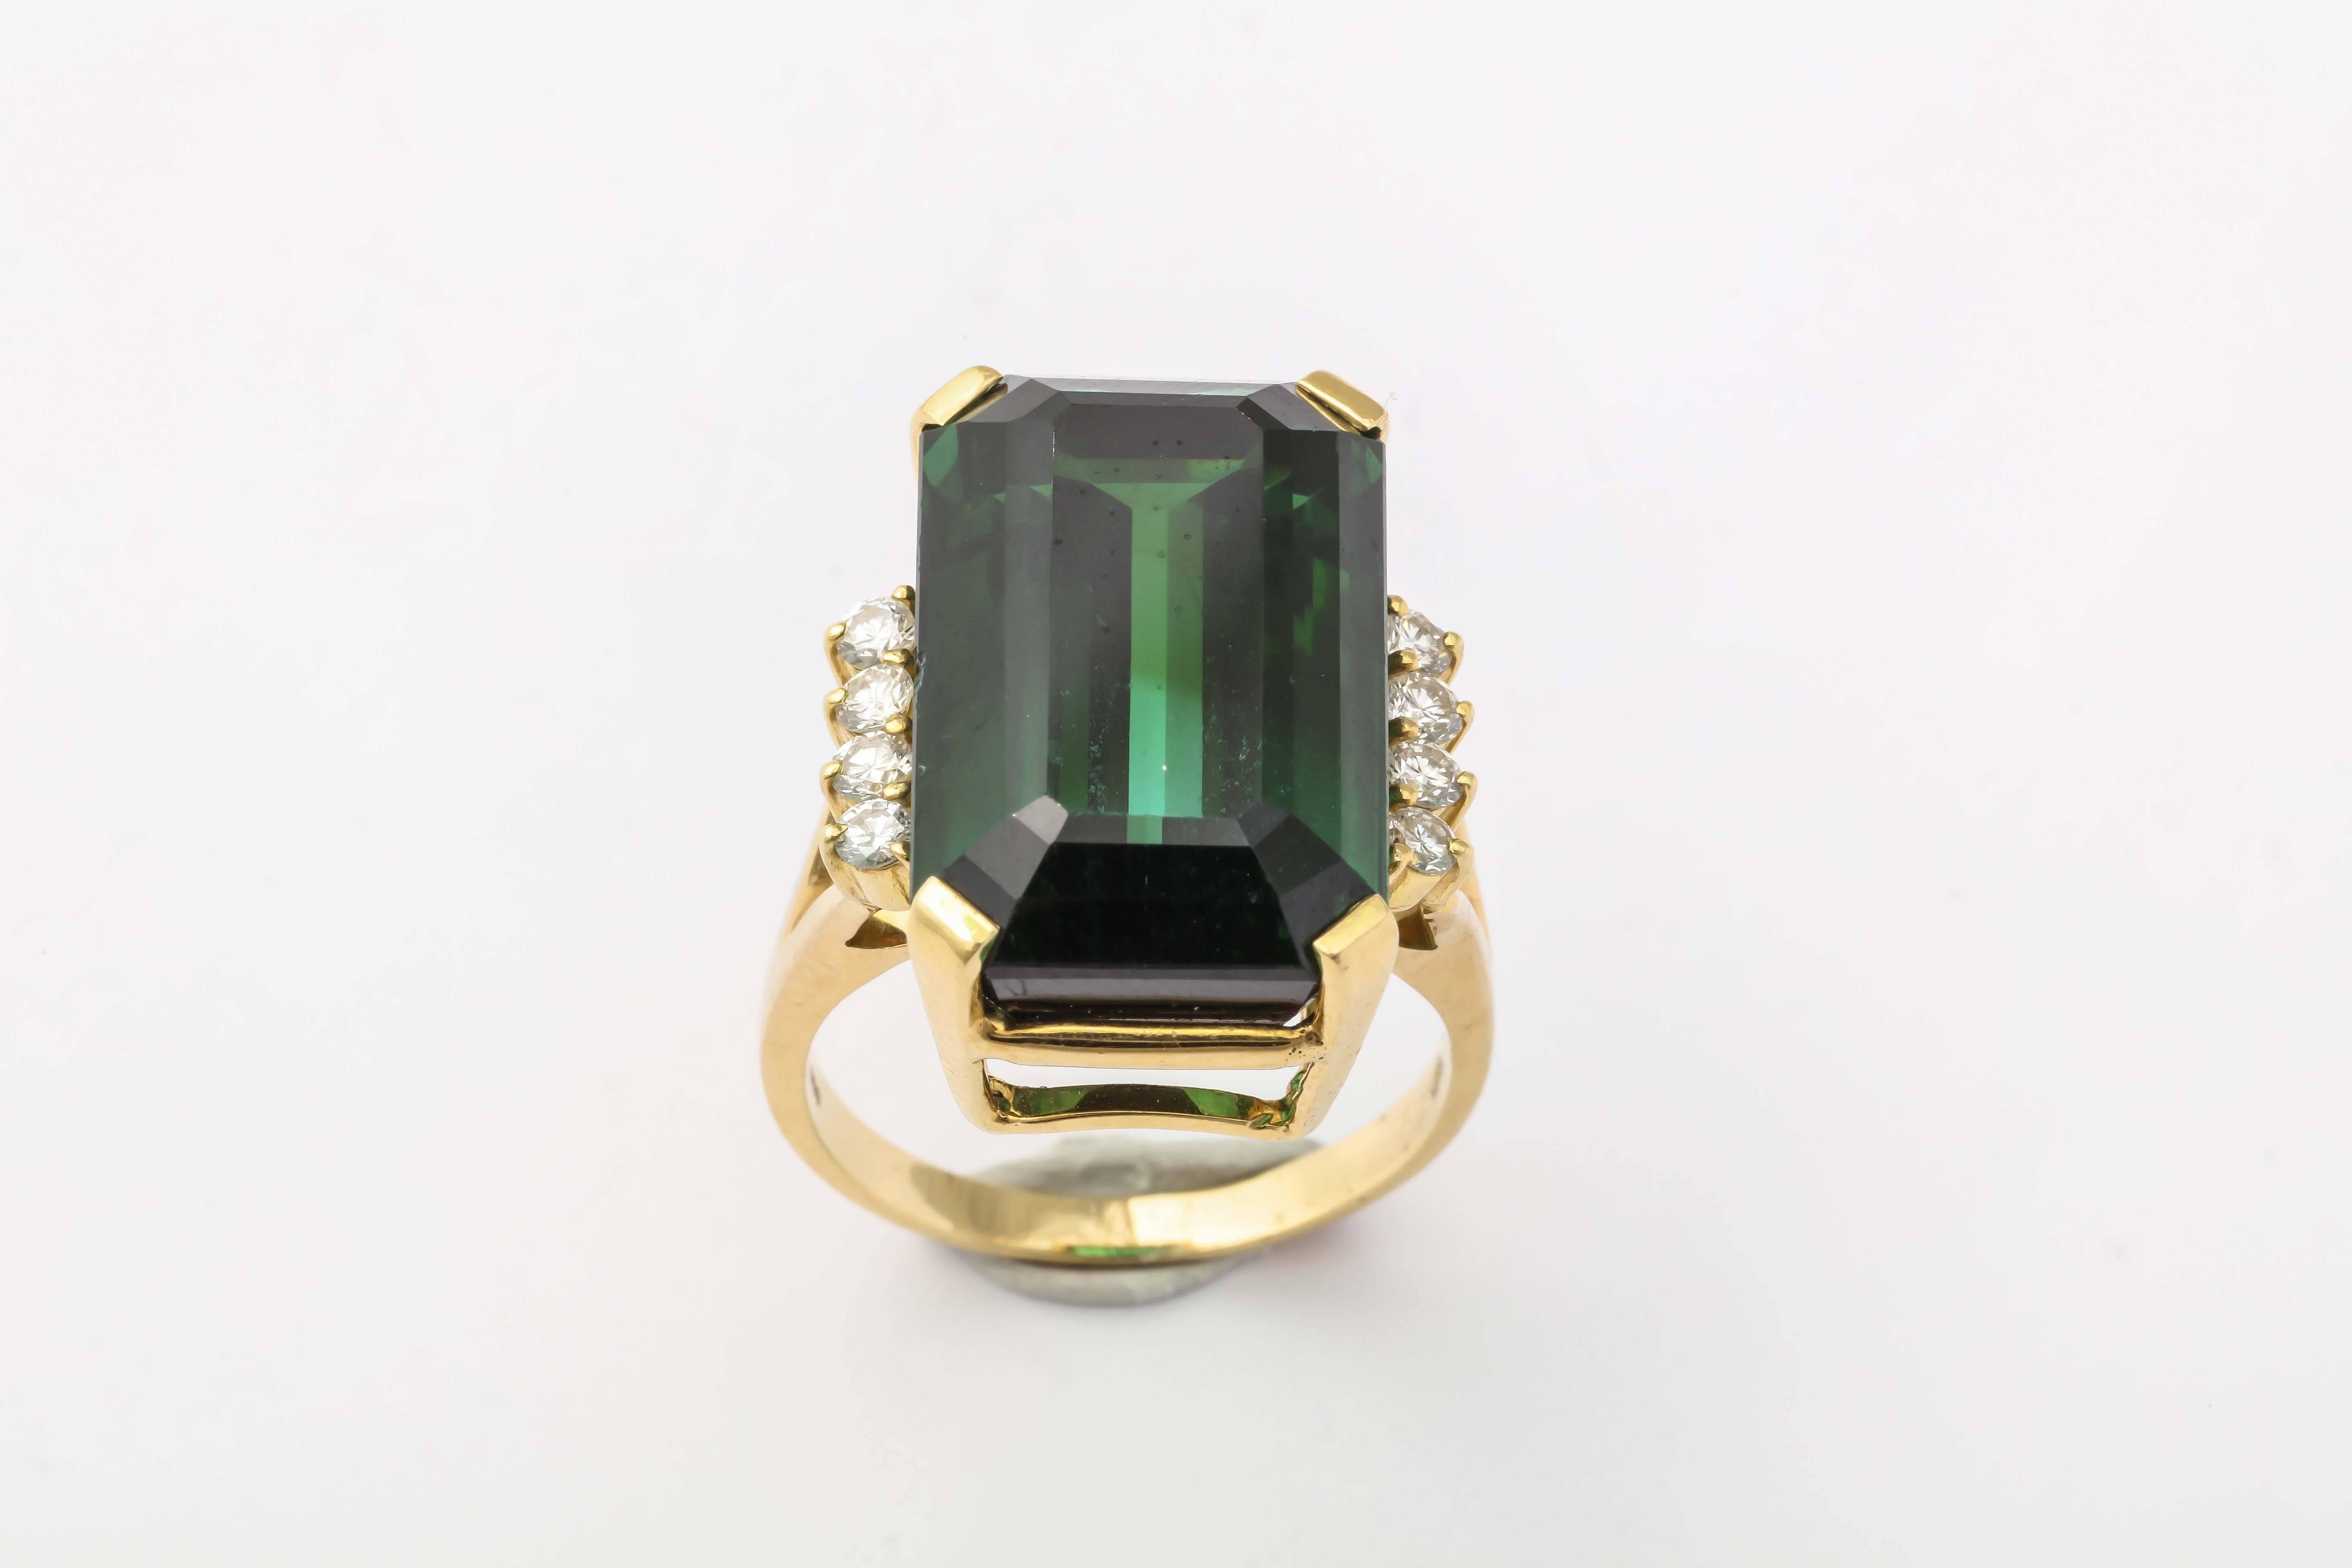 Superb & intense Green Tourmaline Ring set in a handmade 18kt Yellow Gold mounting  flanked by 4 full cut Diamonds on either side.  Measuring a size 8 - although it can be sized up or down. Signed Stern 
Tourmaline approximately 20 carats &